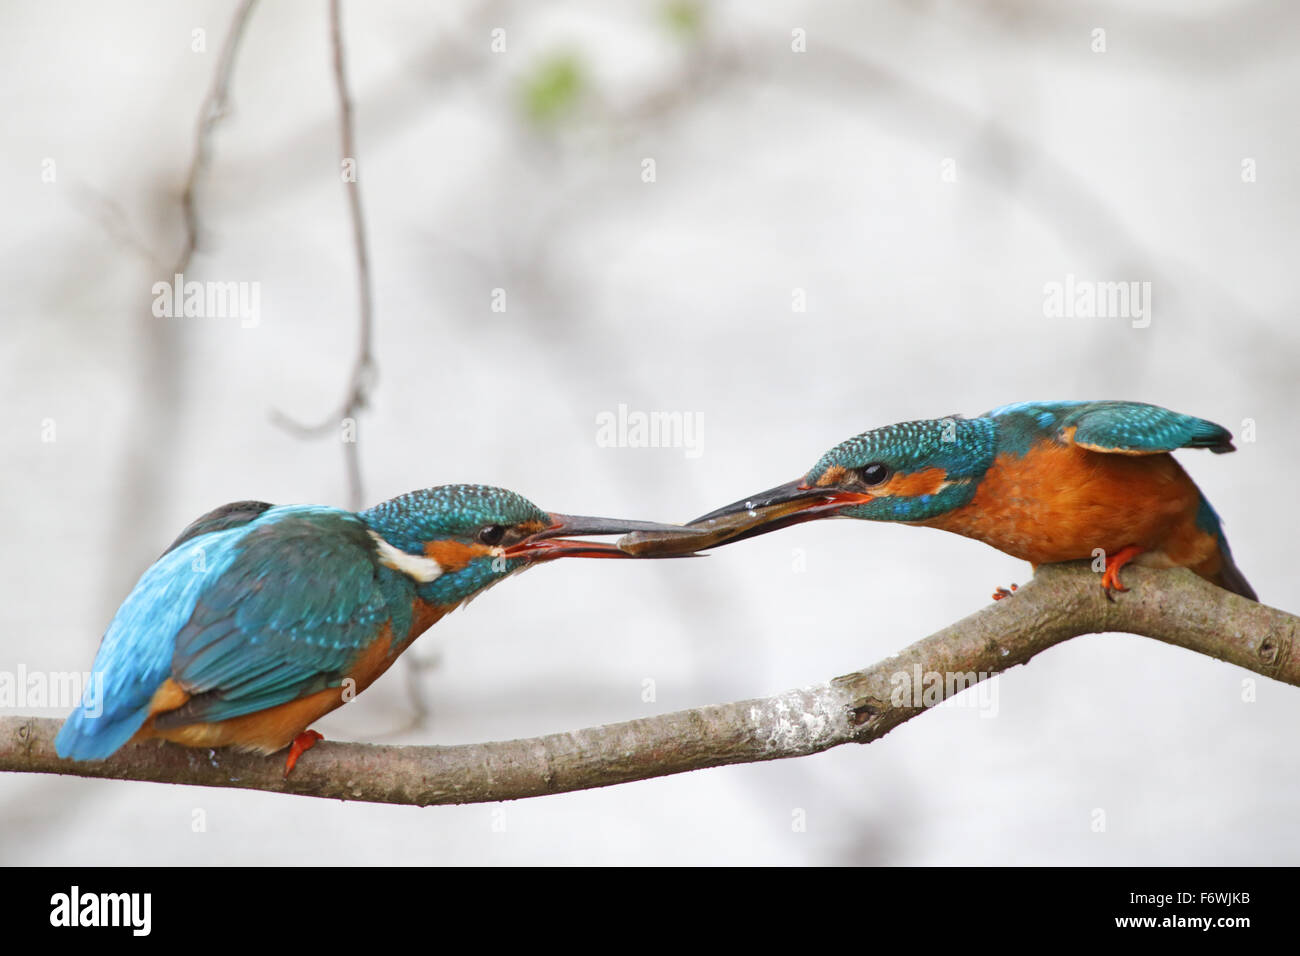 Courtship behavior of a pair of kingfishers. The male offers a fish to his female before mating. Estonia, Europe. Stock Photo